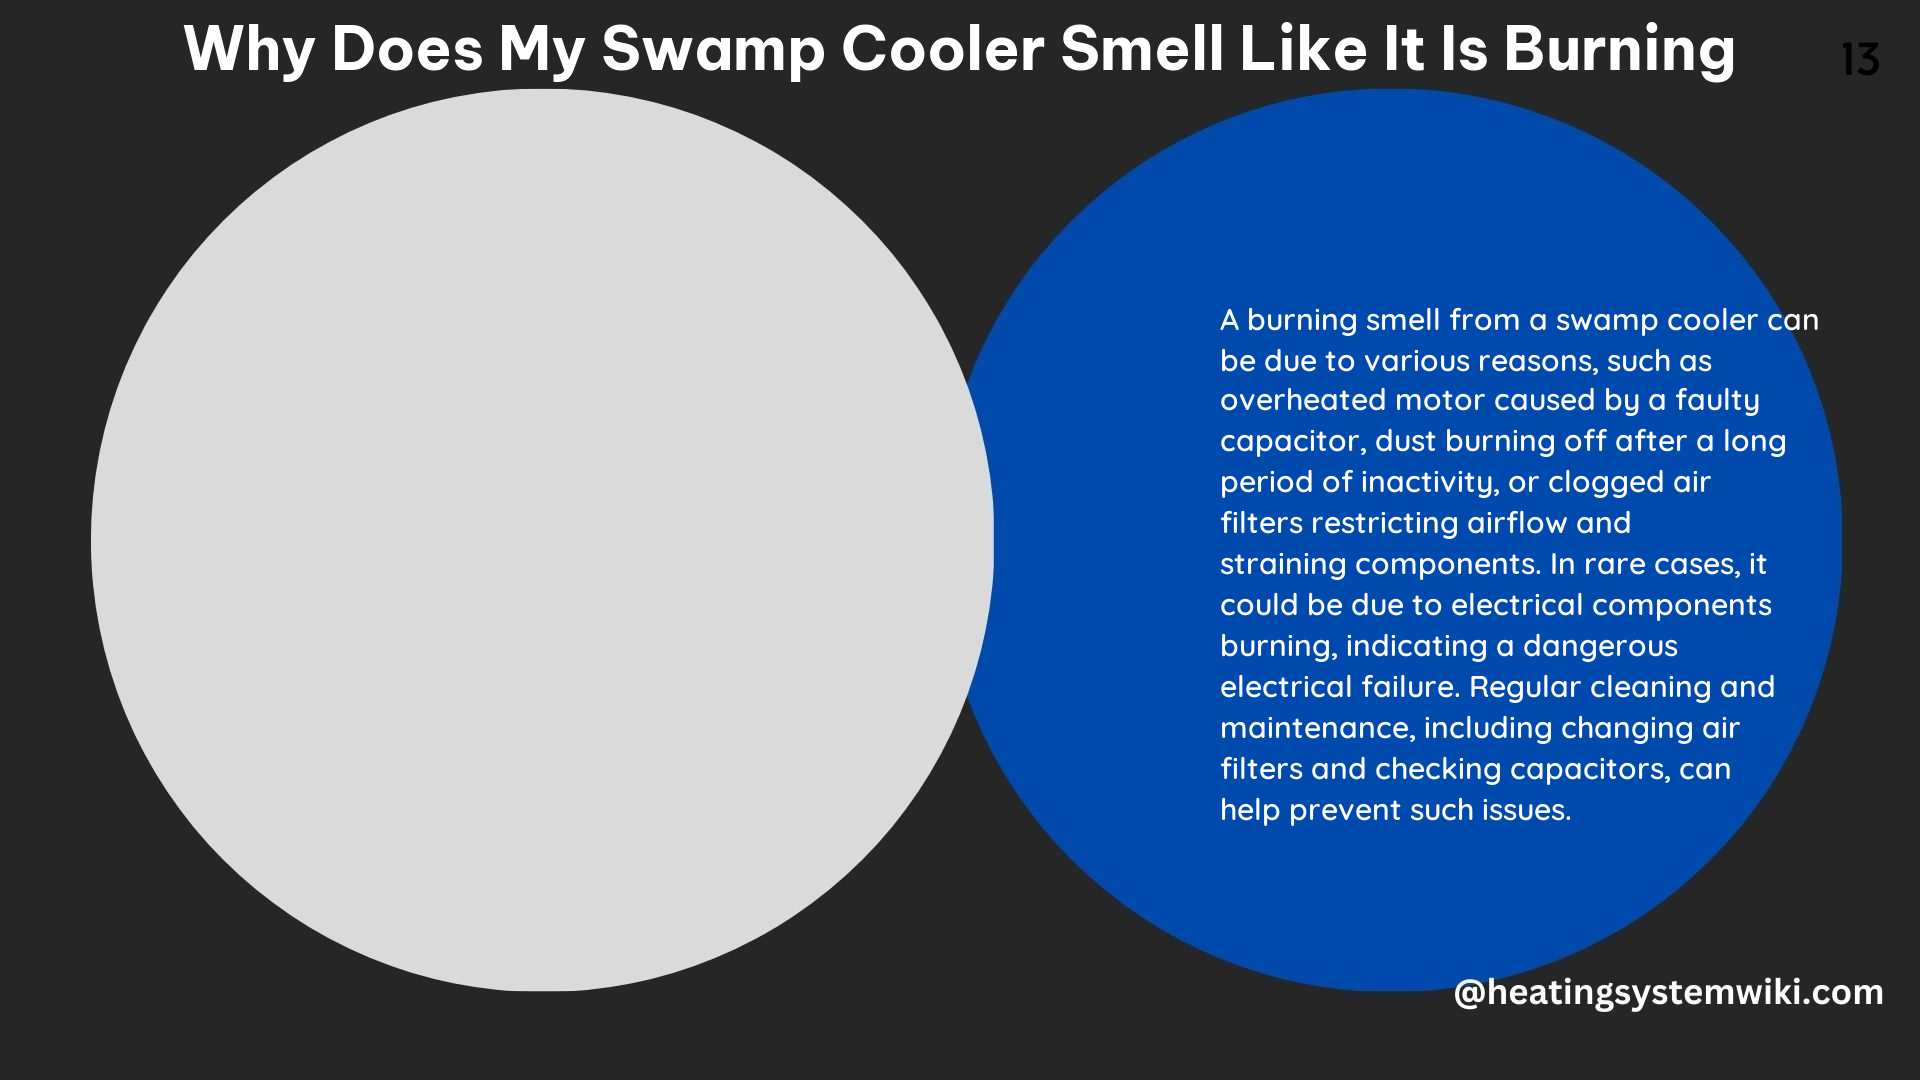 Why Does My Swamp Cooler Smell Like It is Burning